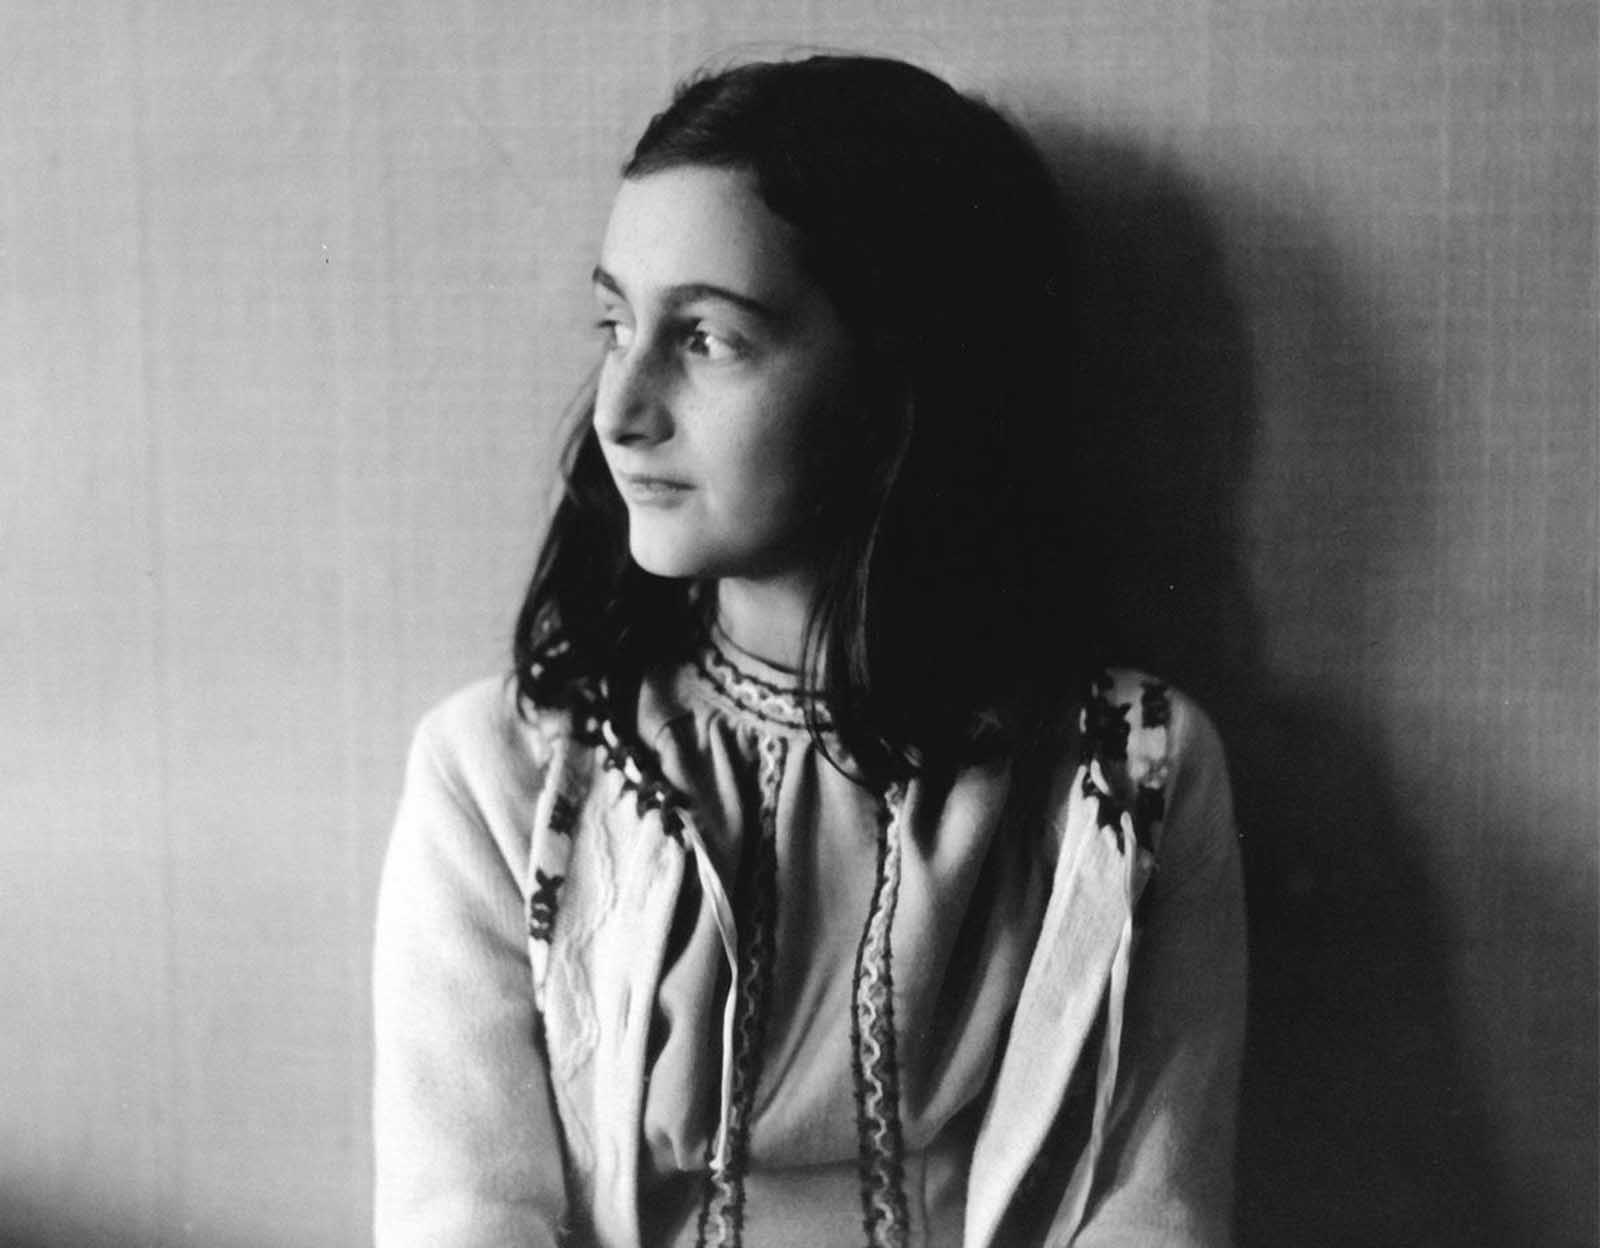 Anne Frank poses in 1941 in this photo made available by Anne Frank House in Amsterdam, Netherlands. In August of 1944, Anne, her family and others who were hiding from the occupying German Security forces, were all captured and shipped off to a series of prisons and concentration camps. Anne died from typhus at age 15 in Bergen-Belsen concentration camp, but her posthumously published diary has made her a symbol of all Jews killed in World War II.